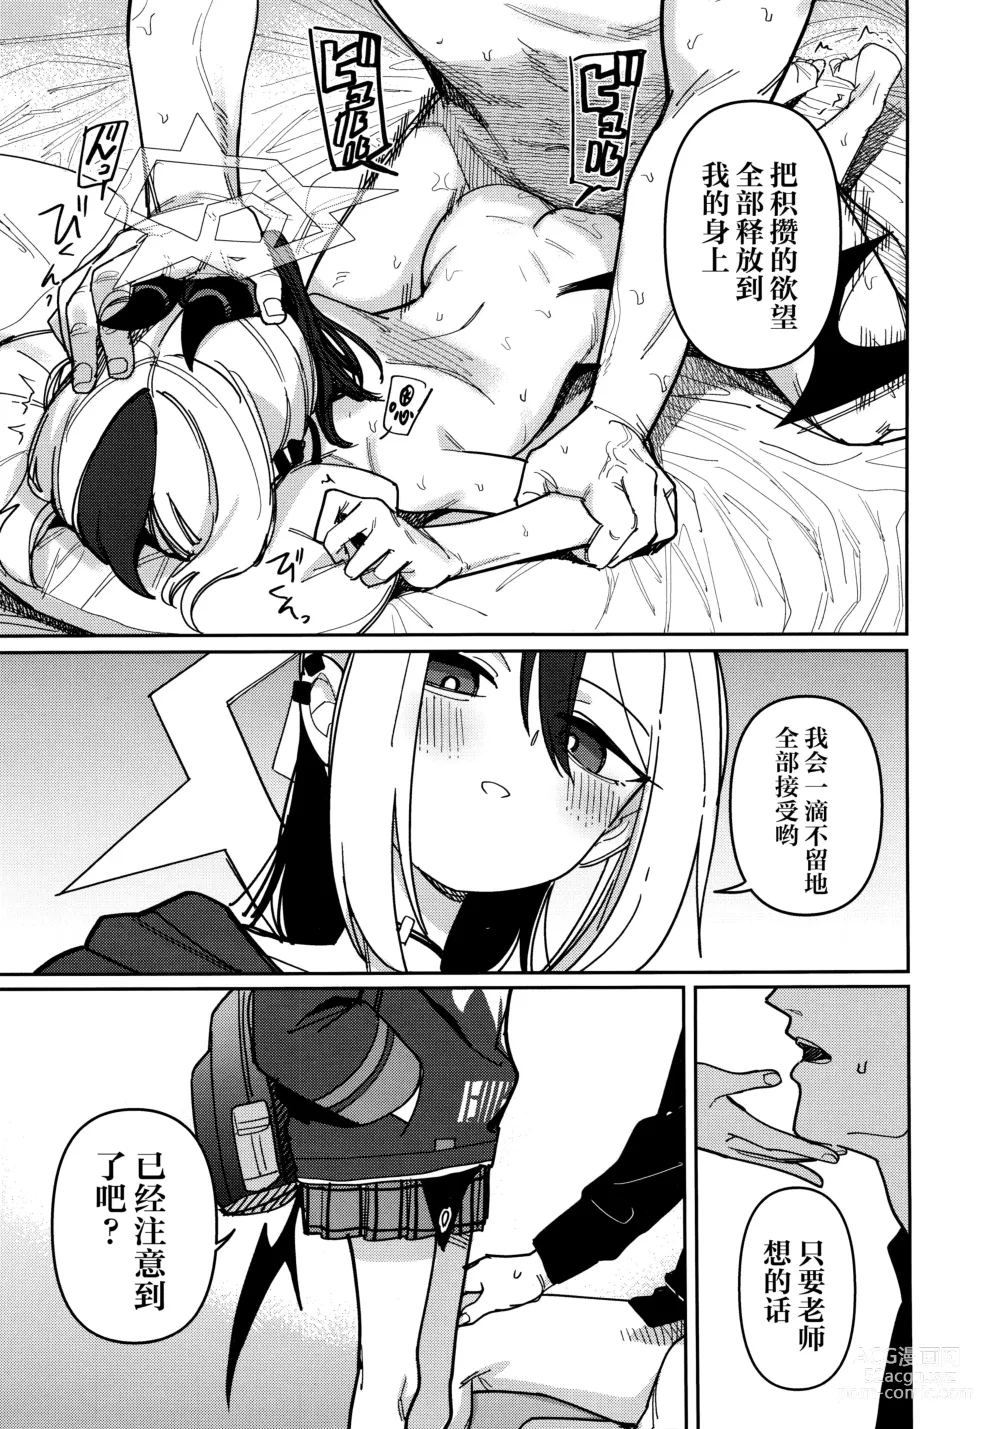 Page 9 of doujinshi 鬼方佳代子不会做这种事情 Part.2